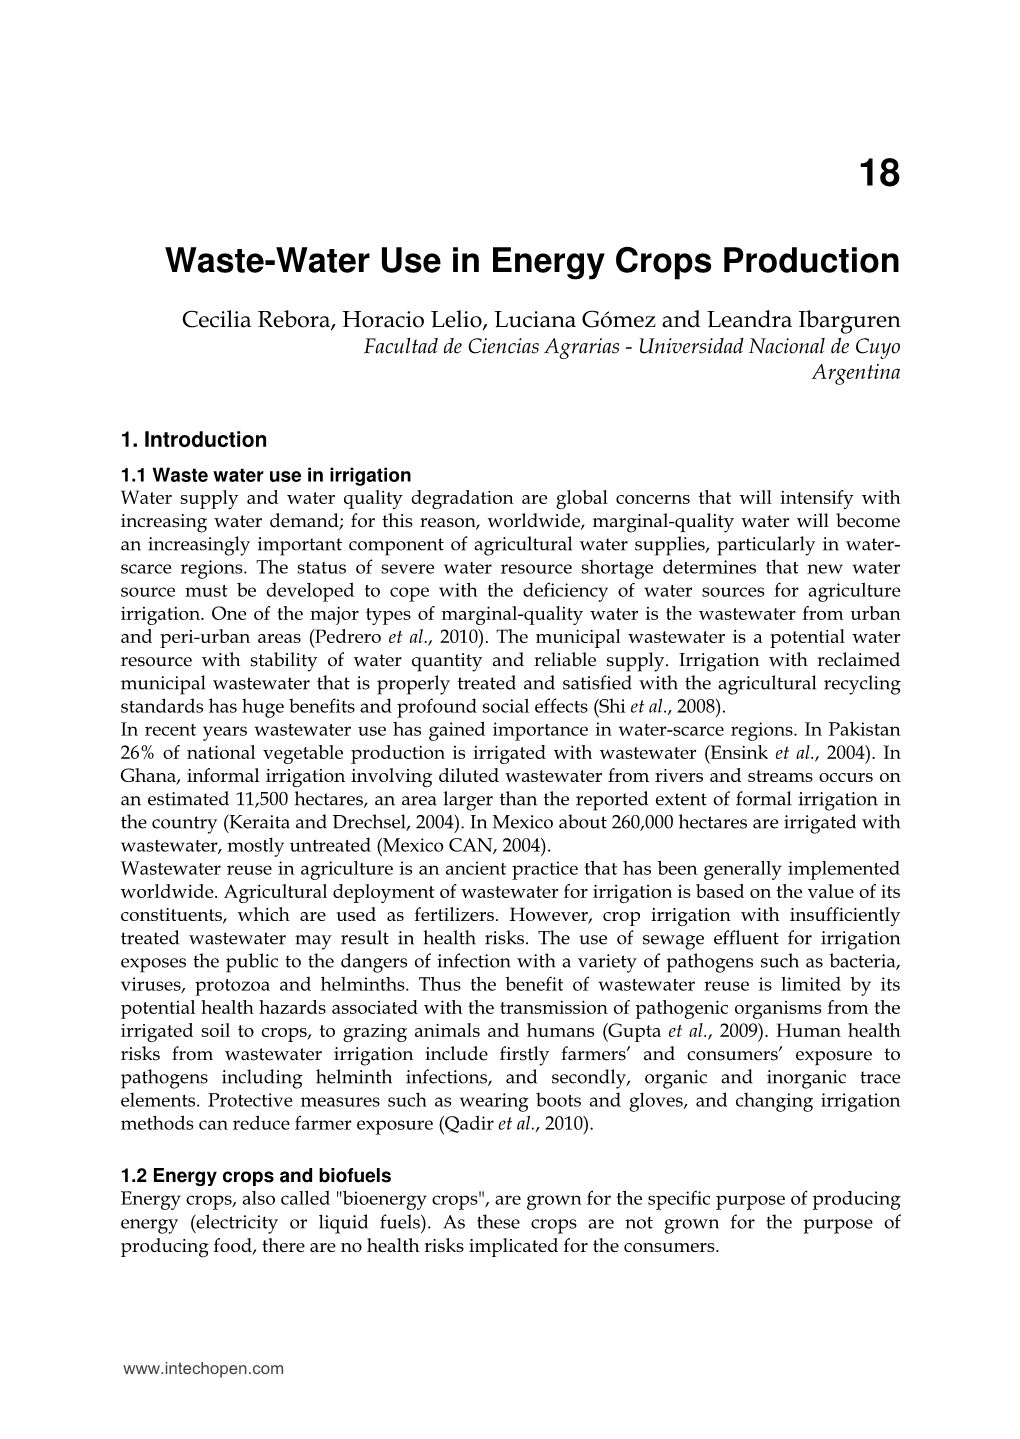 Waste-Water Use in Energy Crops Production